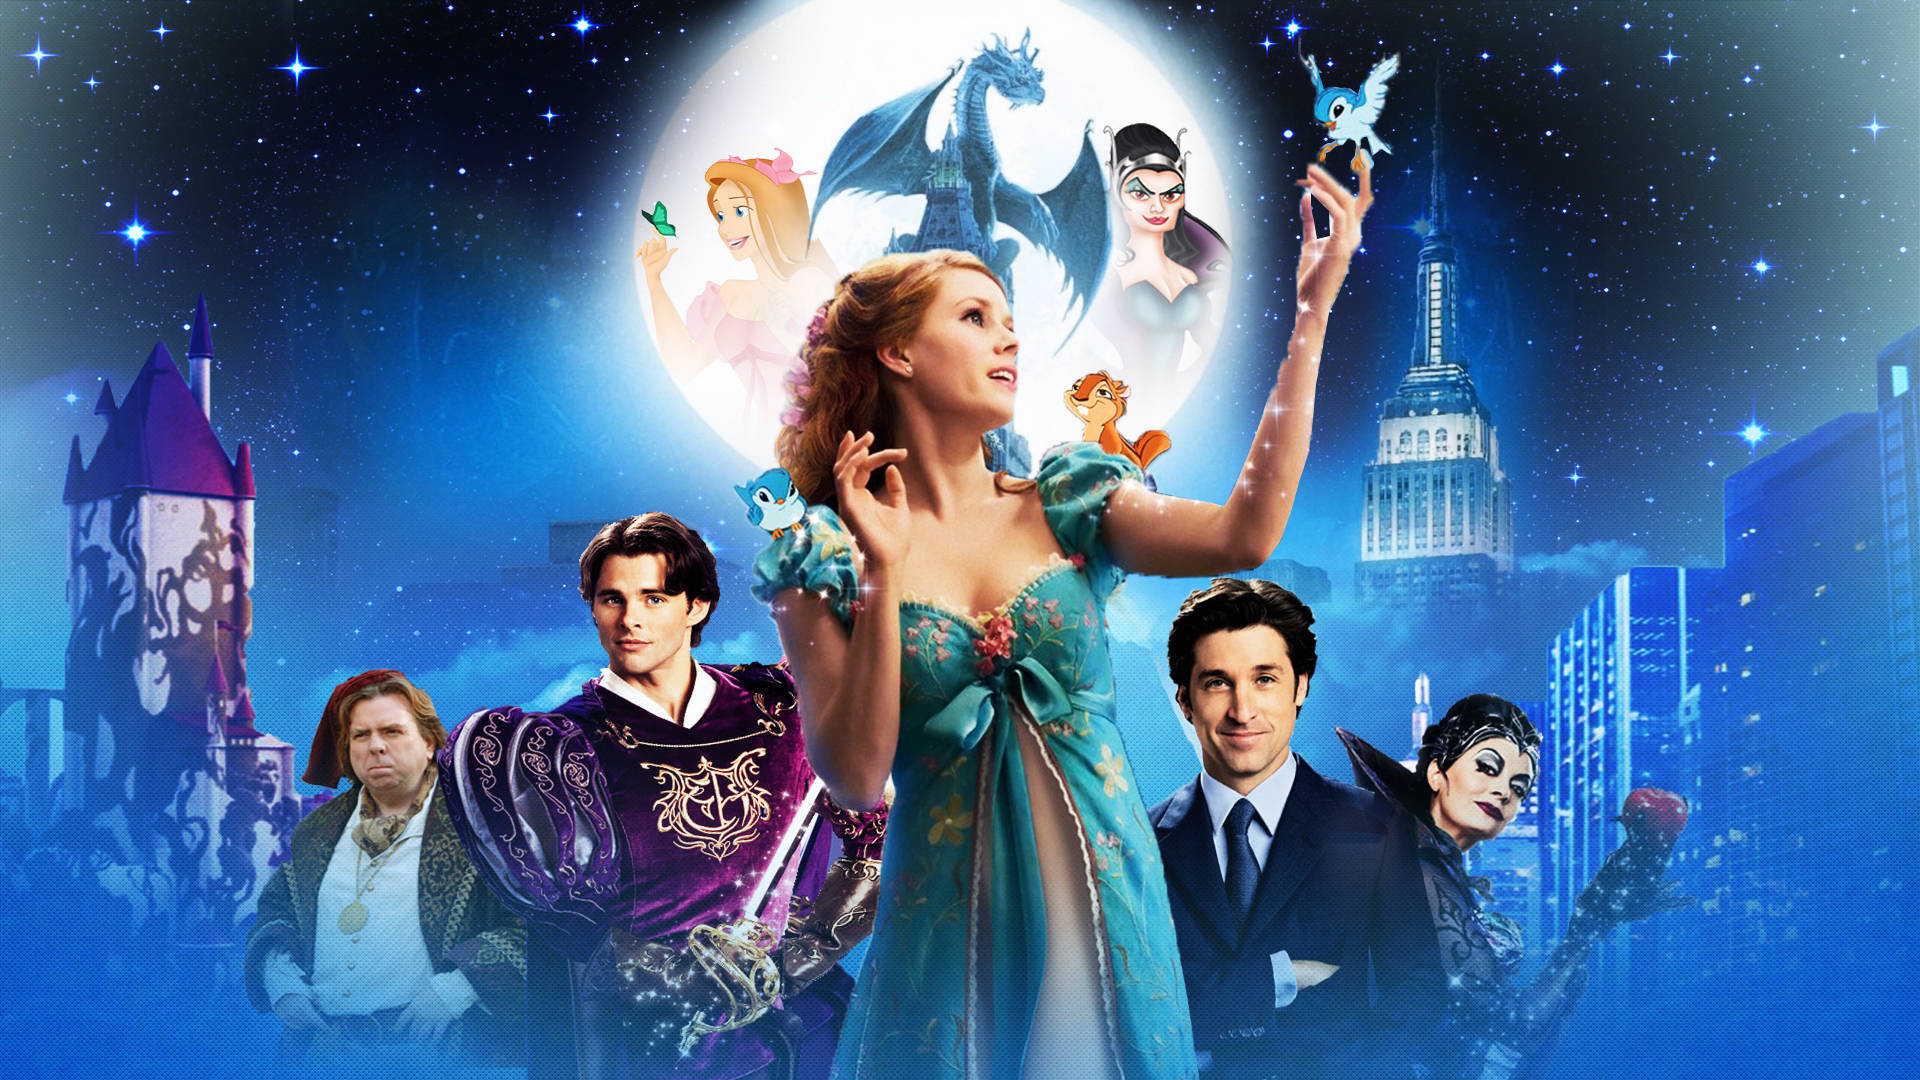 Awesome Enchanted Disney Movie Poster Wallpaper